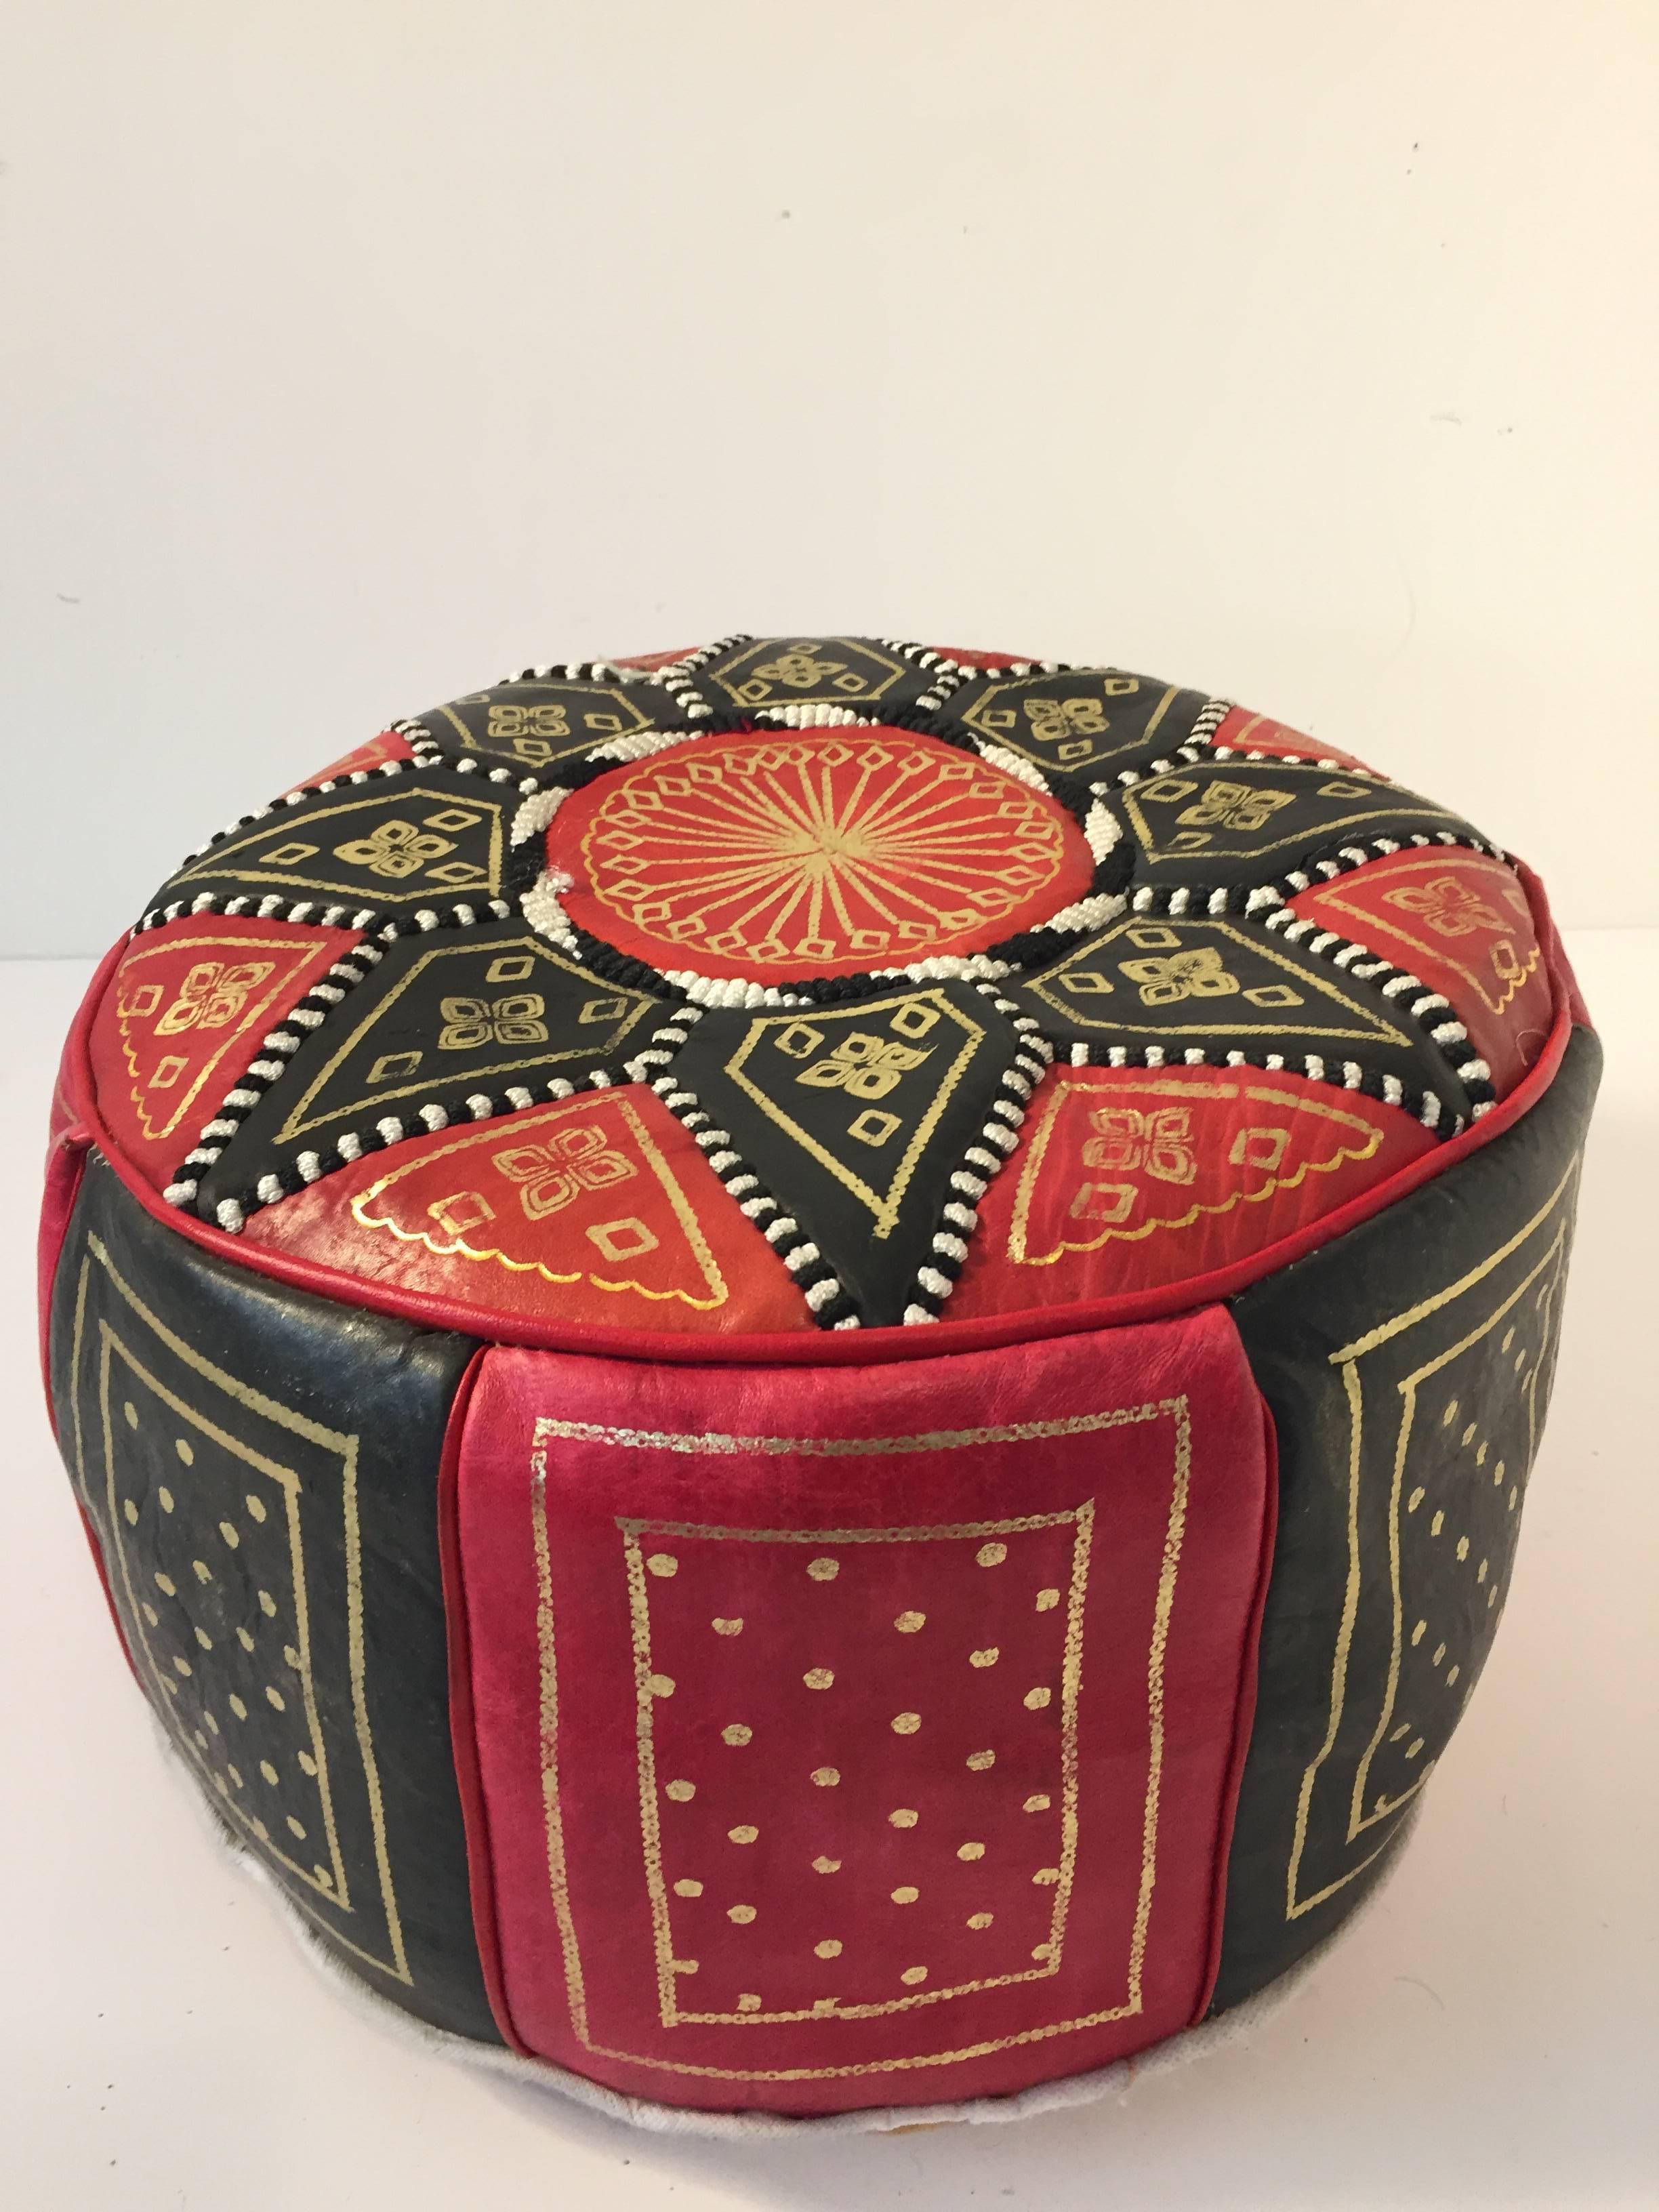 Moroccan red and black round pouf hand tooled and embroidered in Fez Morocco. 
Beautiful geometrical designs are hand-stitched and hand stamped on this Moroccan stool by expert Artisan. 
Use these round handcrafted poufs as ottoman, footstool or